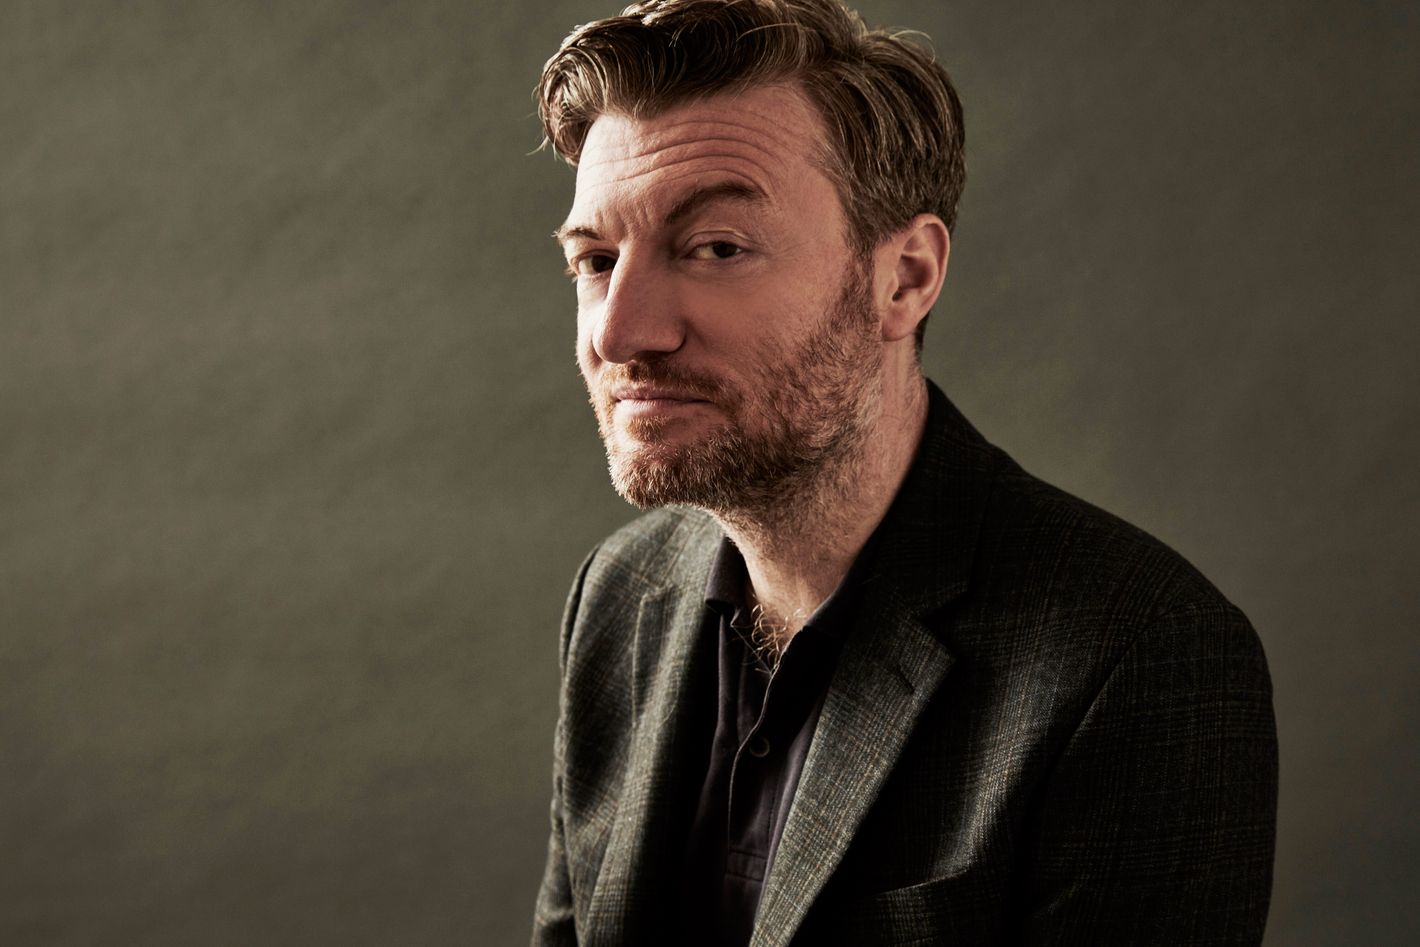 Black Mirror Creator Charlie Brooker on Predicting Trump, Brexit, and How the Internet Is Making Us Crazy